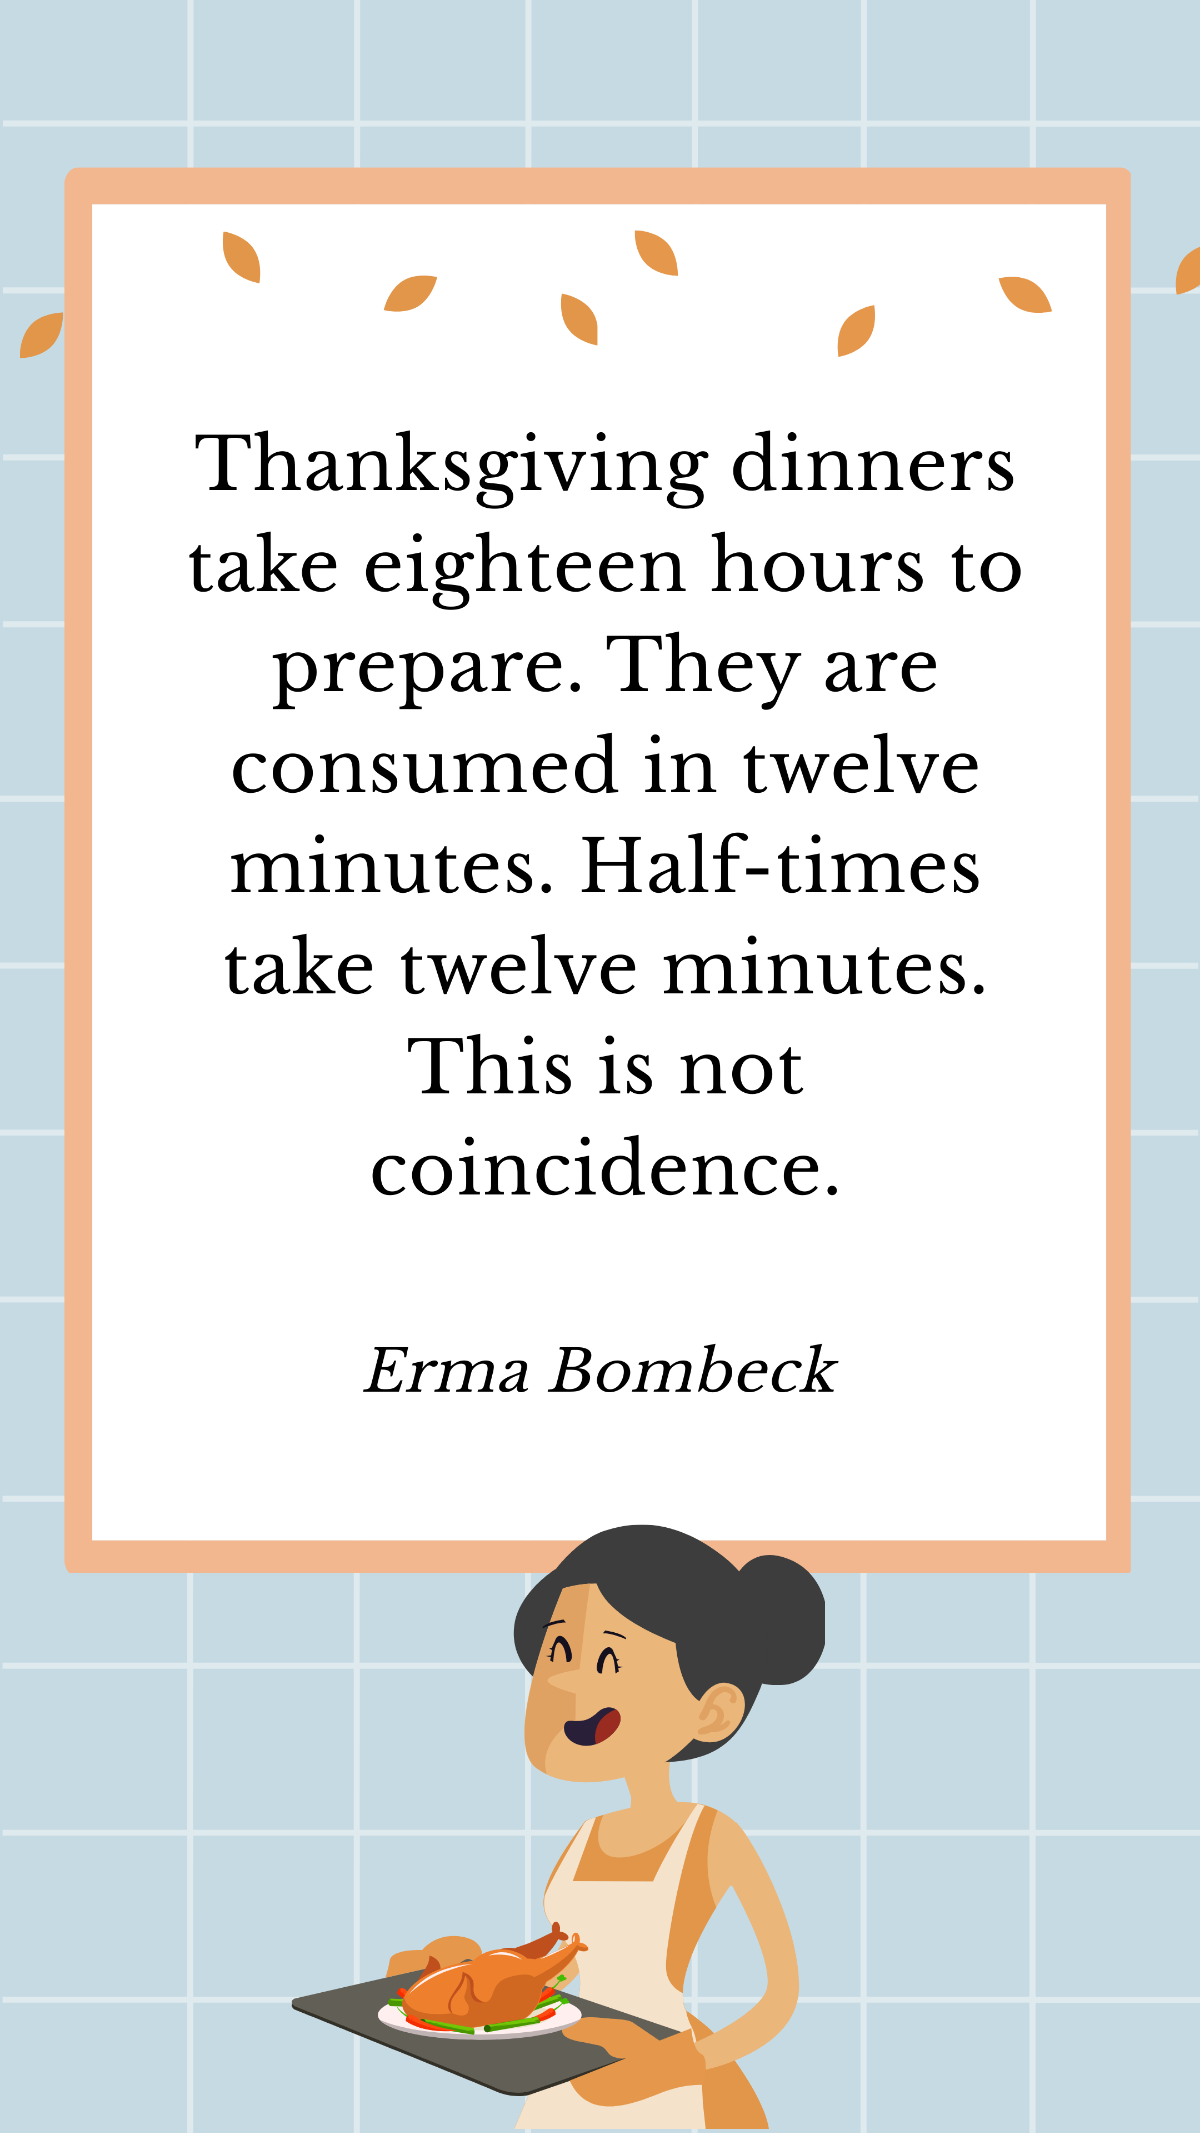 Erma Bombeck - Thanksgiving dinners take eighteen hours to prepare. They are consumed in twelve minutes. Half-times take twelve minutes. This is not coincidence. Template